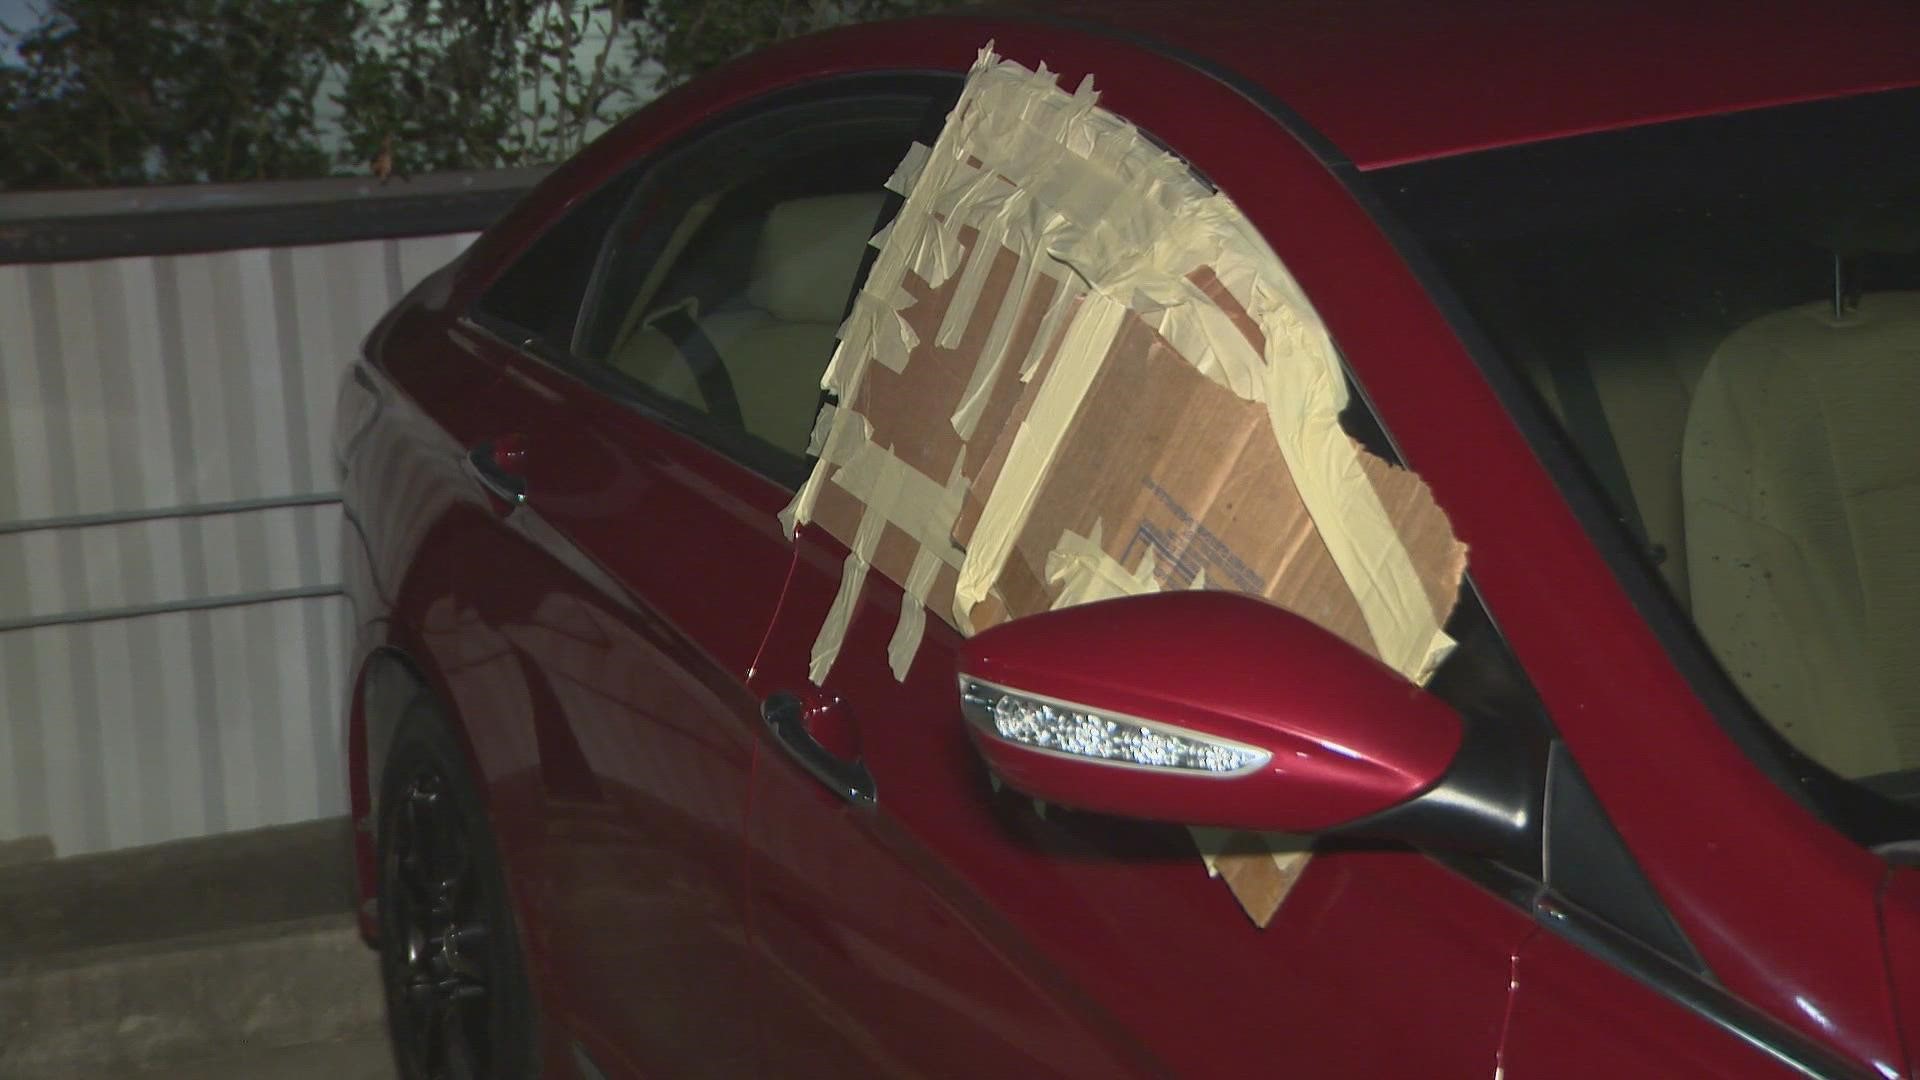 Residents at the Villas at Hermann Park say they found numerous cars broken into Thursday morning.